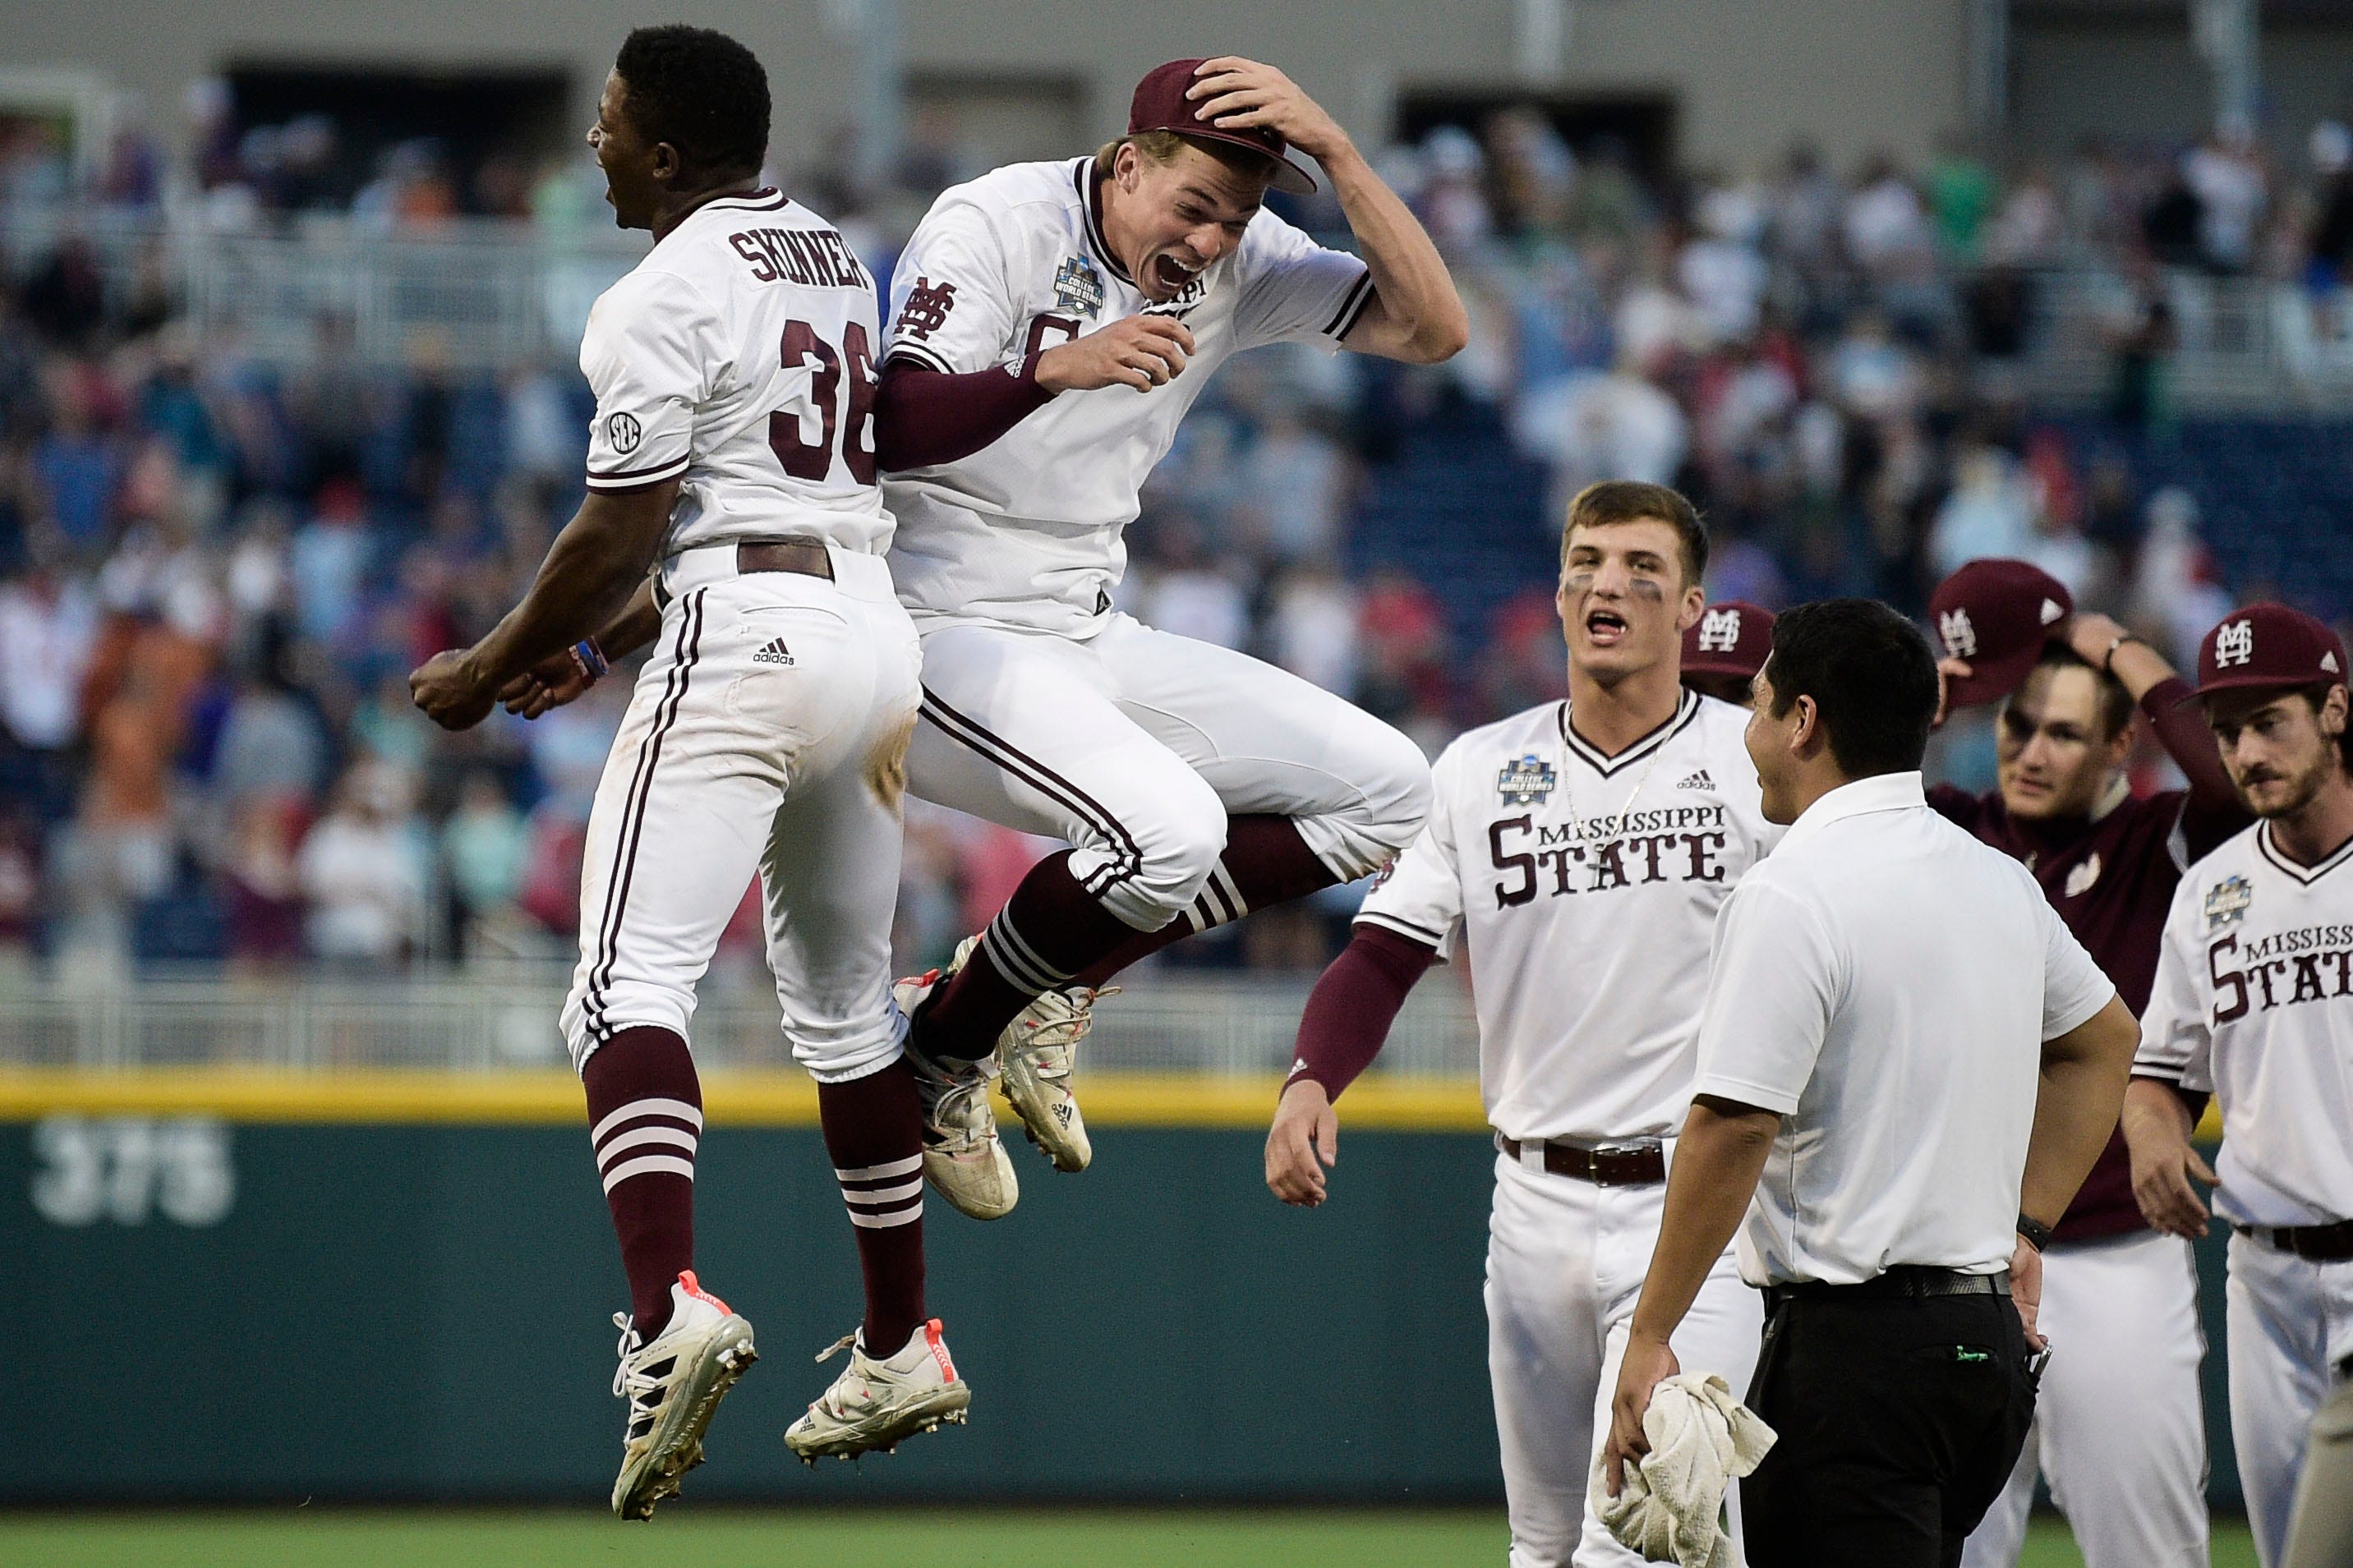 Has Mississippi State baseball ever won the College World Series?